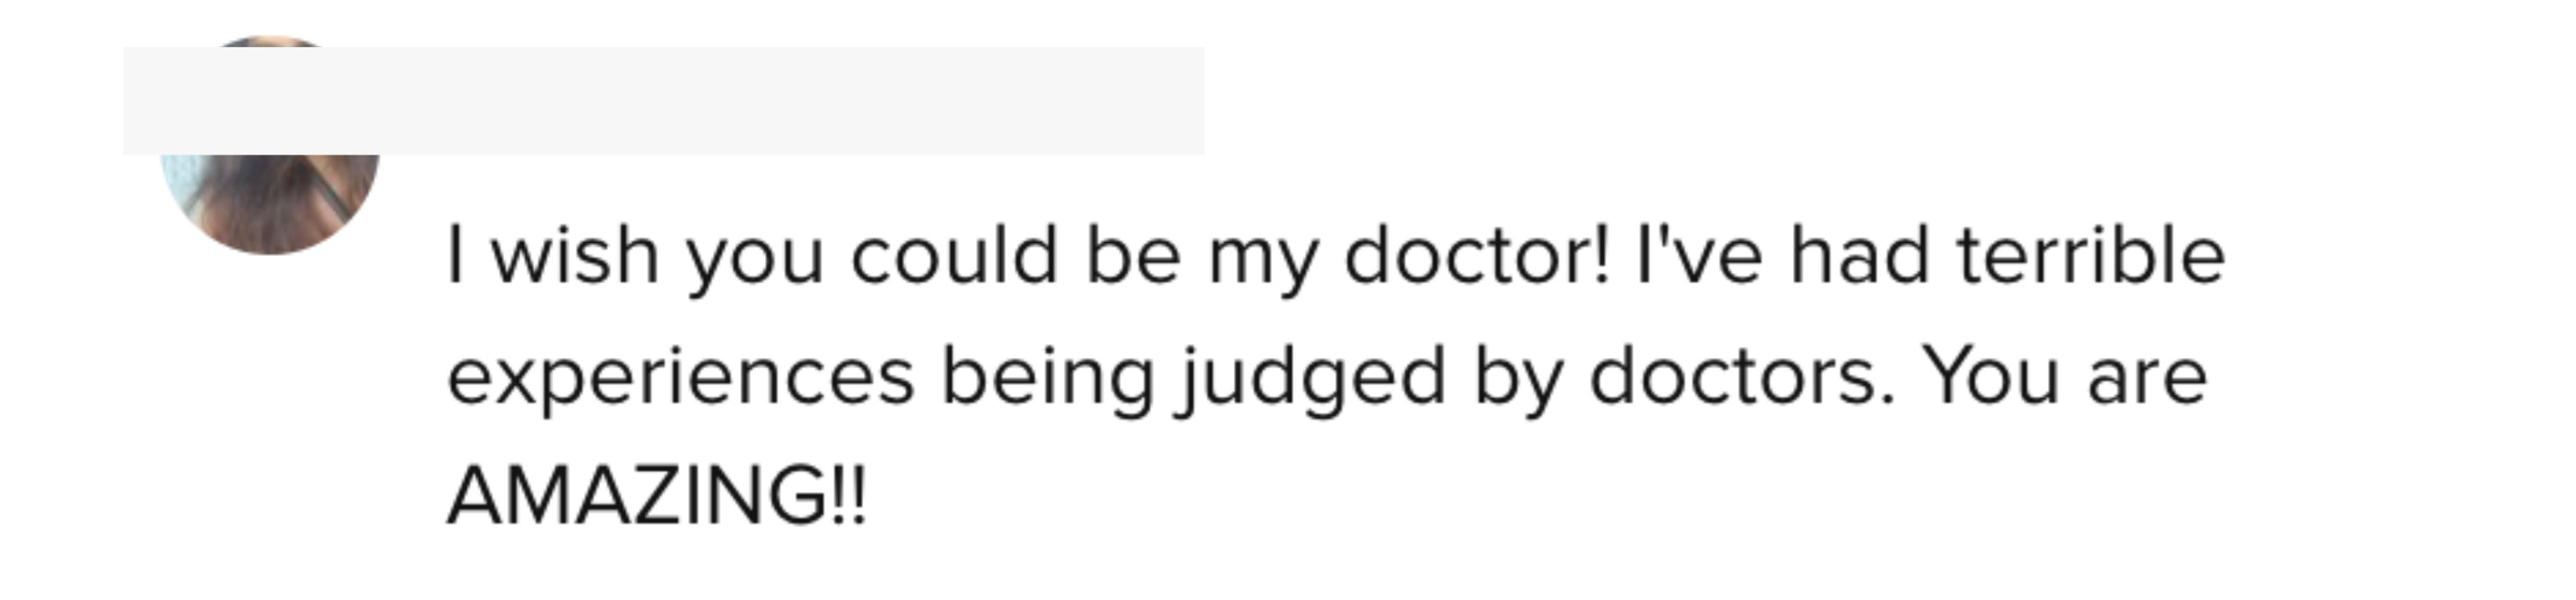 Another person said they wished he was their doctor